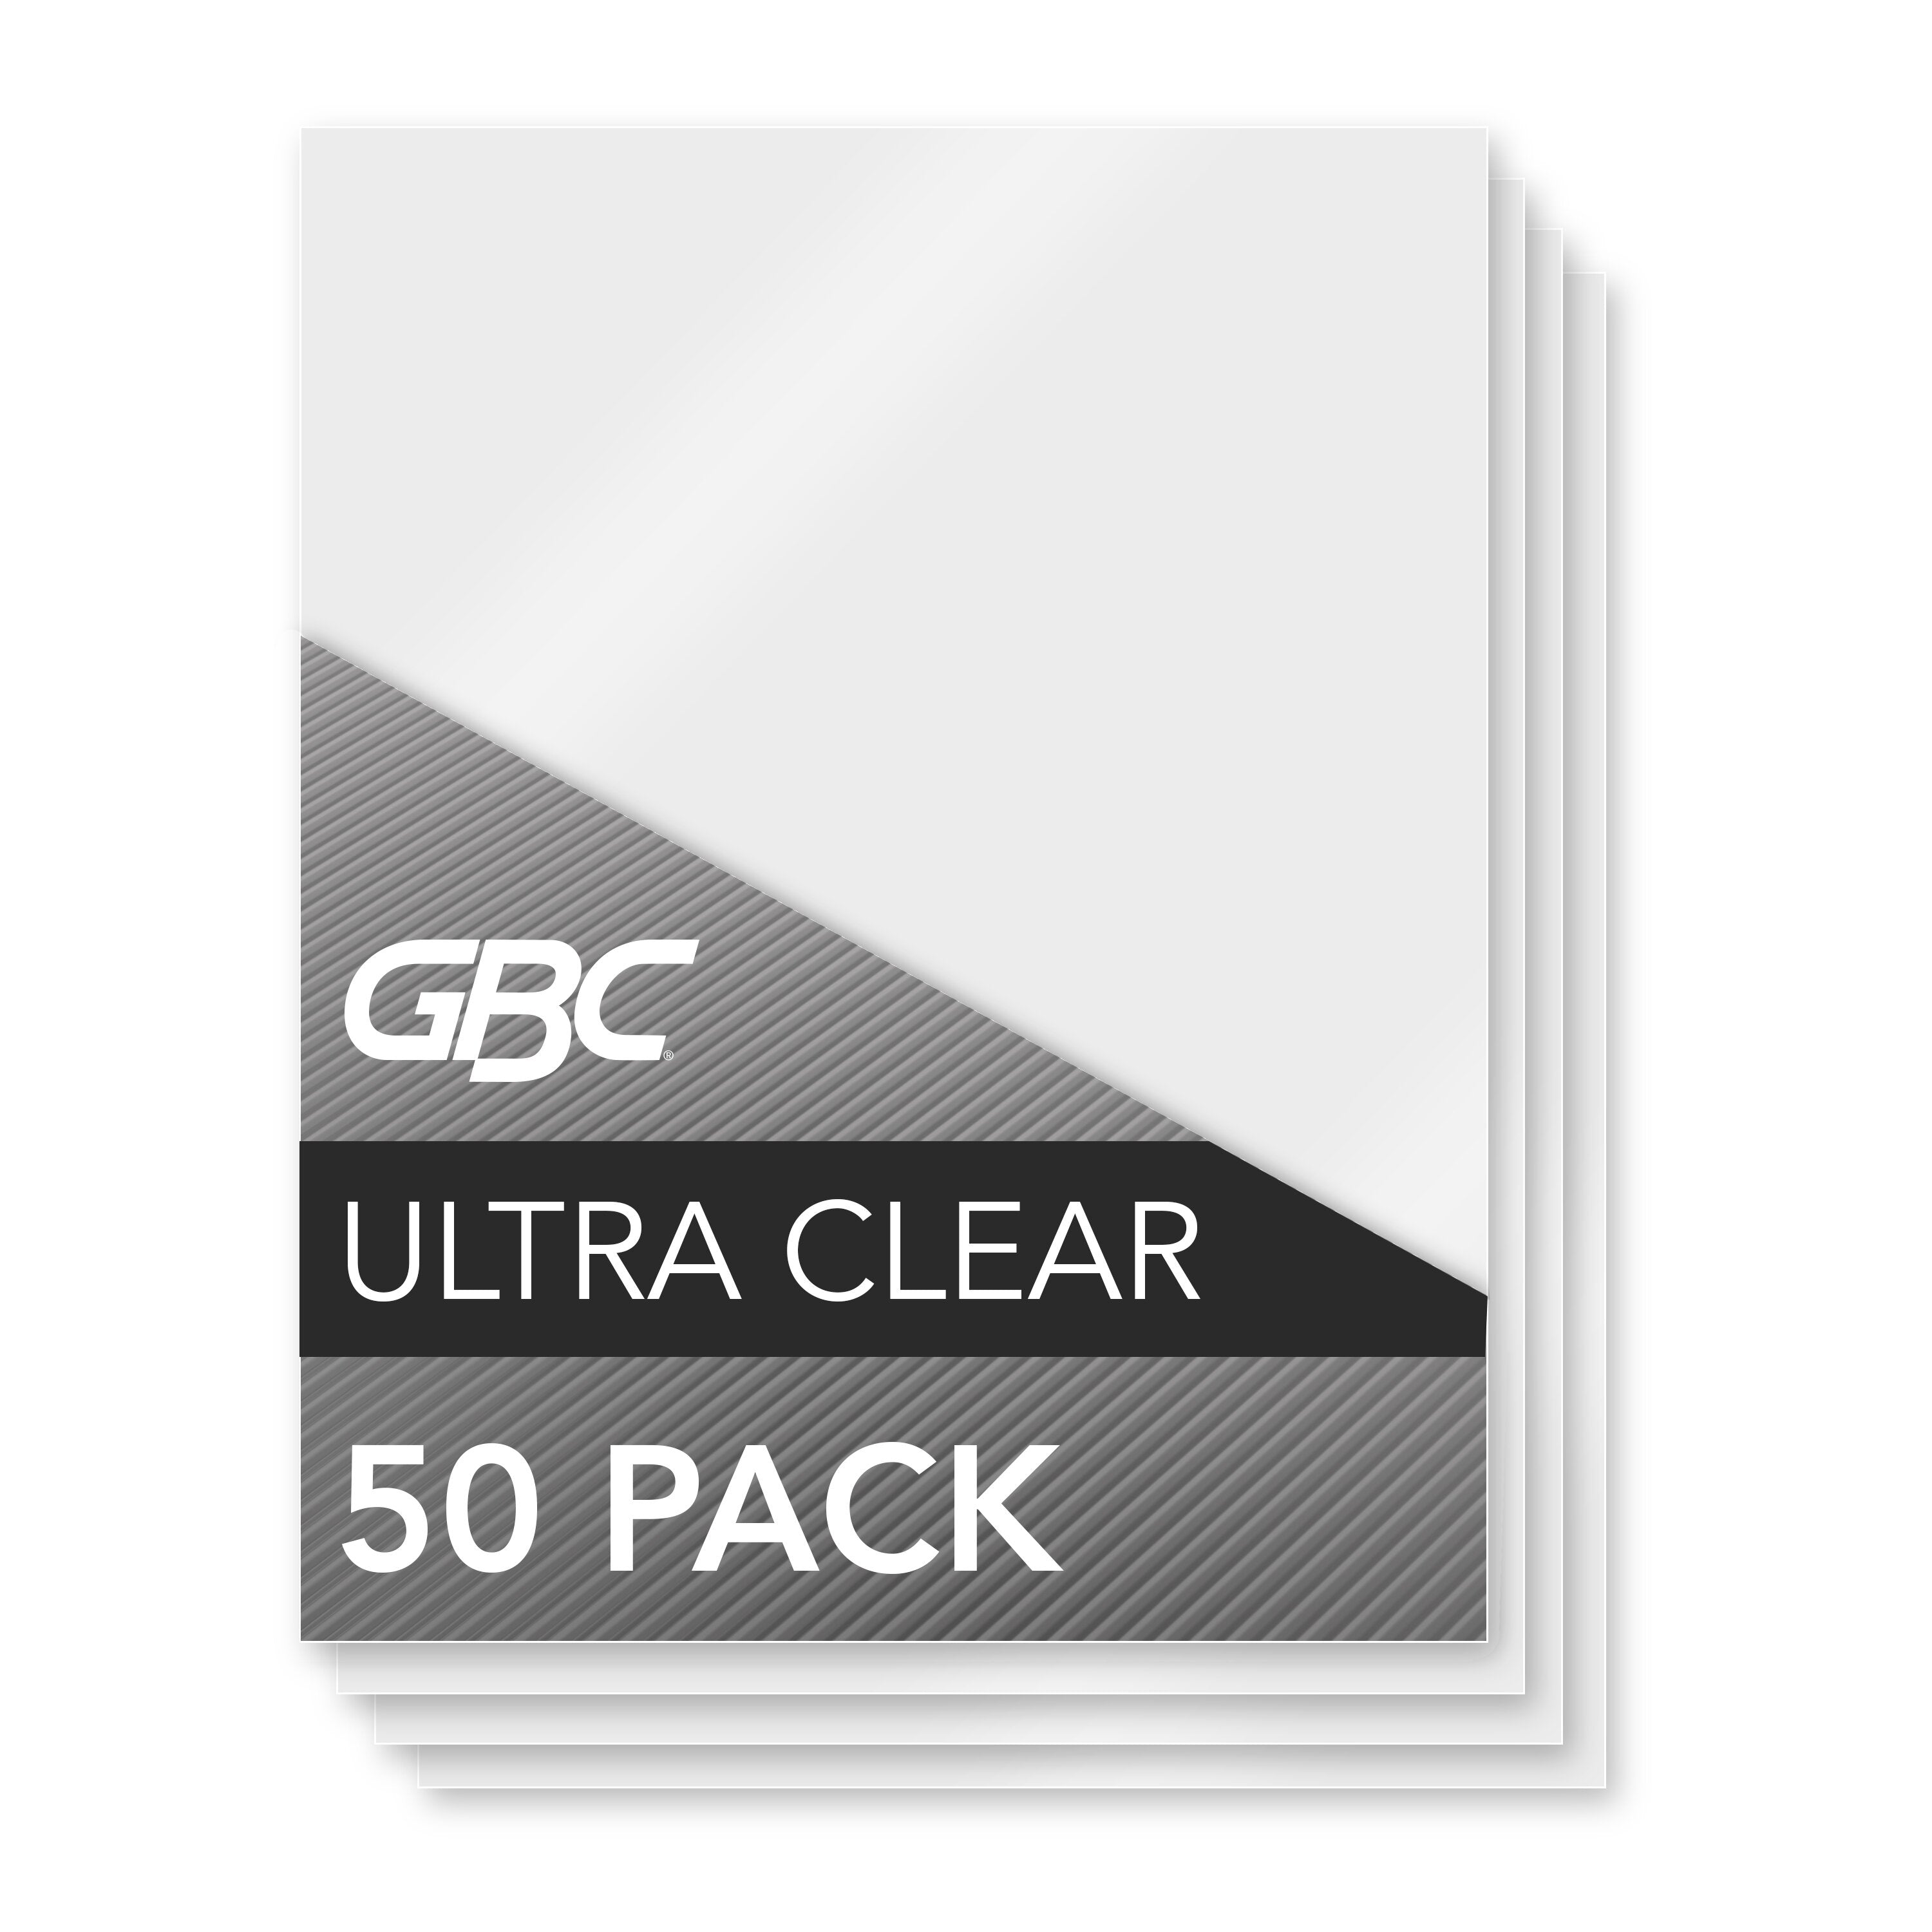 GBC Ultra Clear Letter Size Thermal Laminating Pouches, Speed Format, 10 mil, 50 Pack